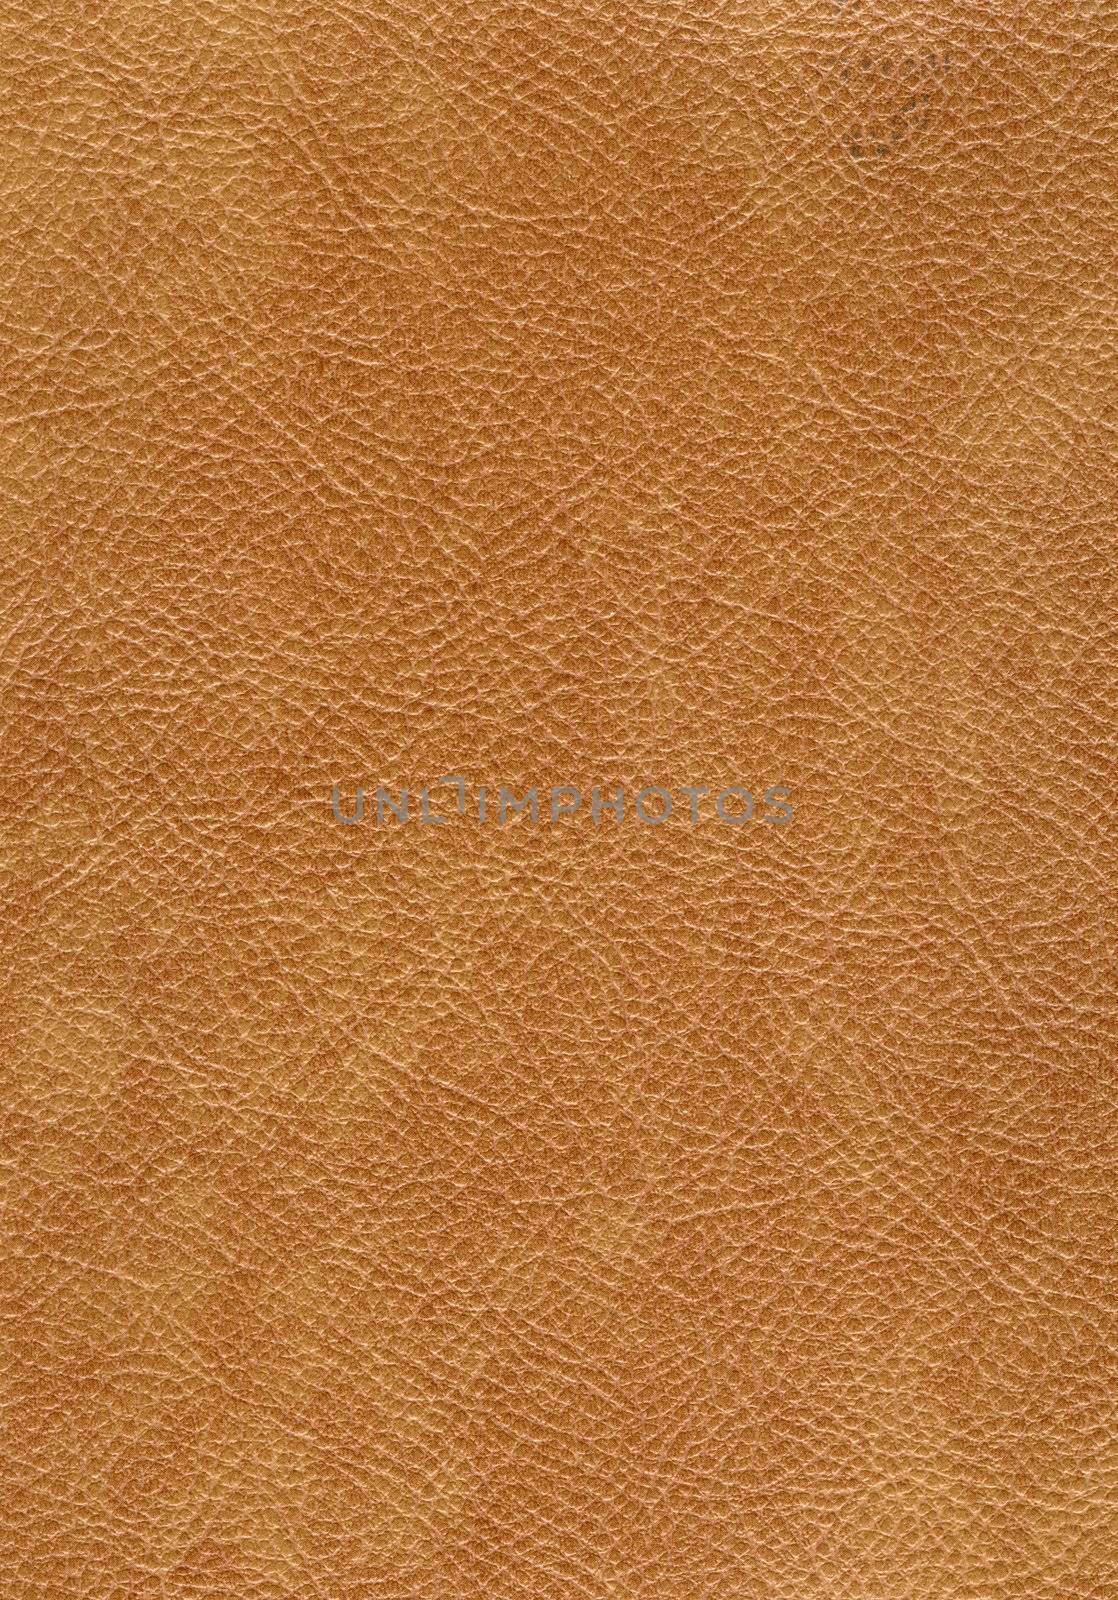 scanned texture of artificial leather